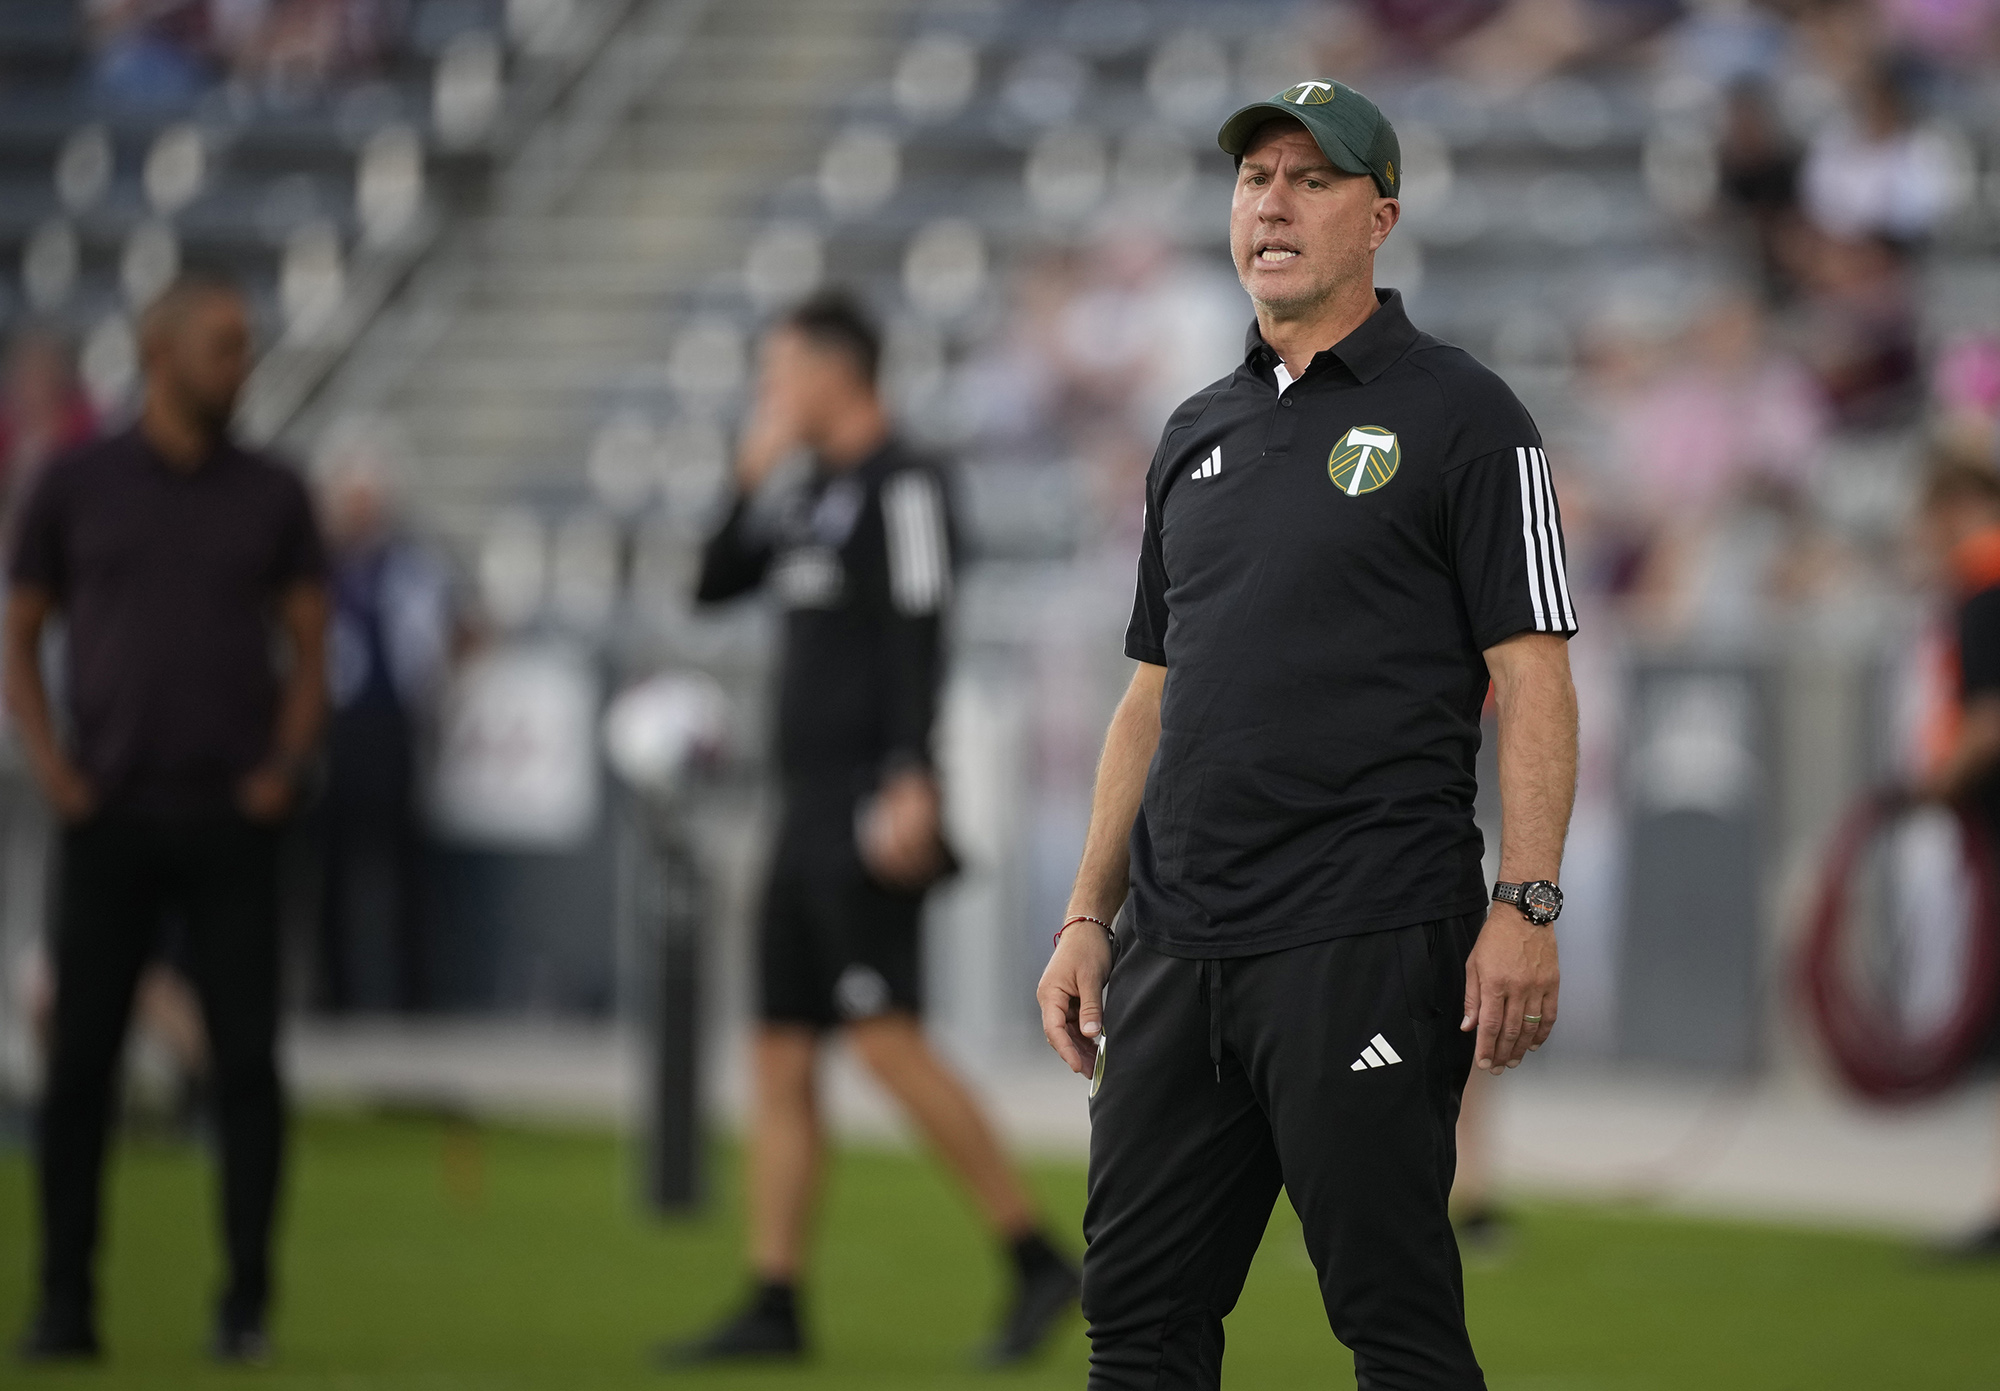 The Portland Timbers fired coach Giovanni Savarese on Monday, Aug. 21, 2023, parting ways with the winningest coach in franchise history a day after a 5-0 loss to the Houston Dynamo.